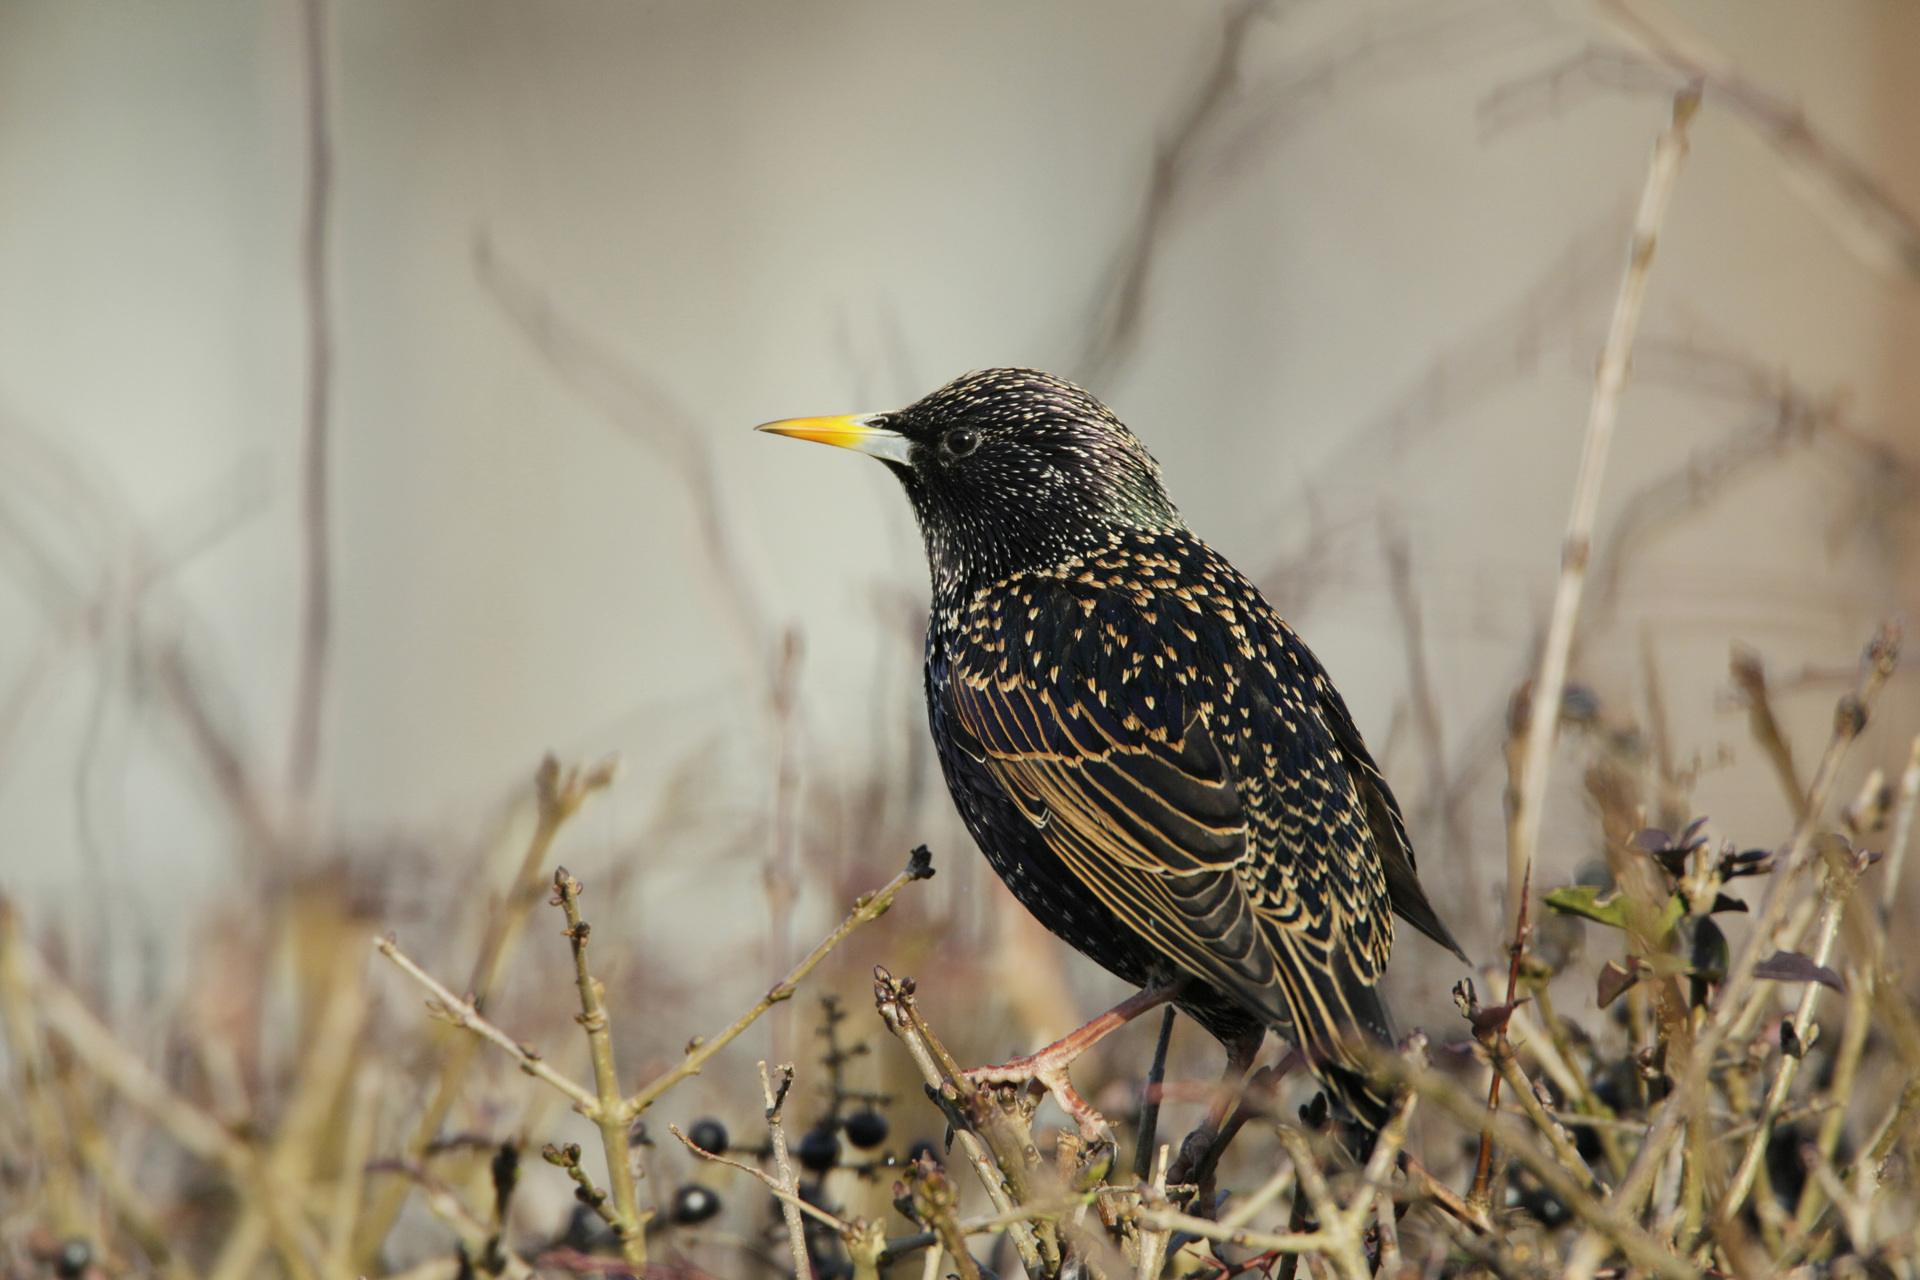 Starlings came in second place (Andy Hay)